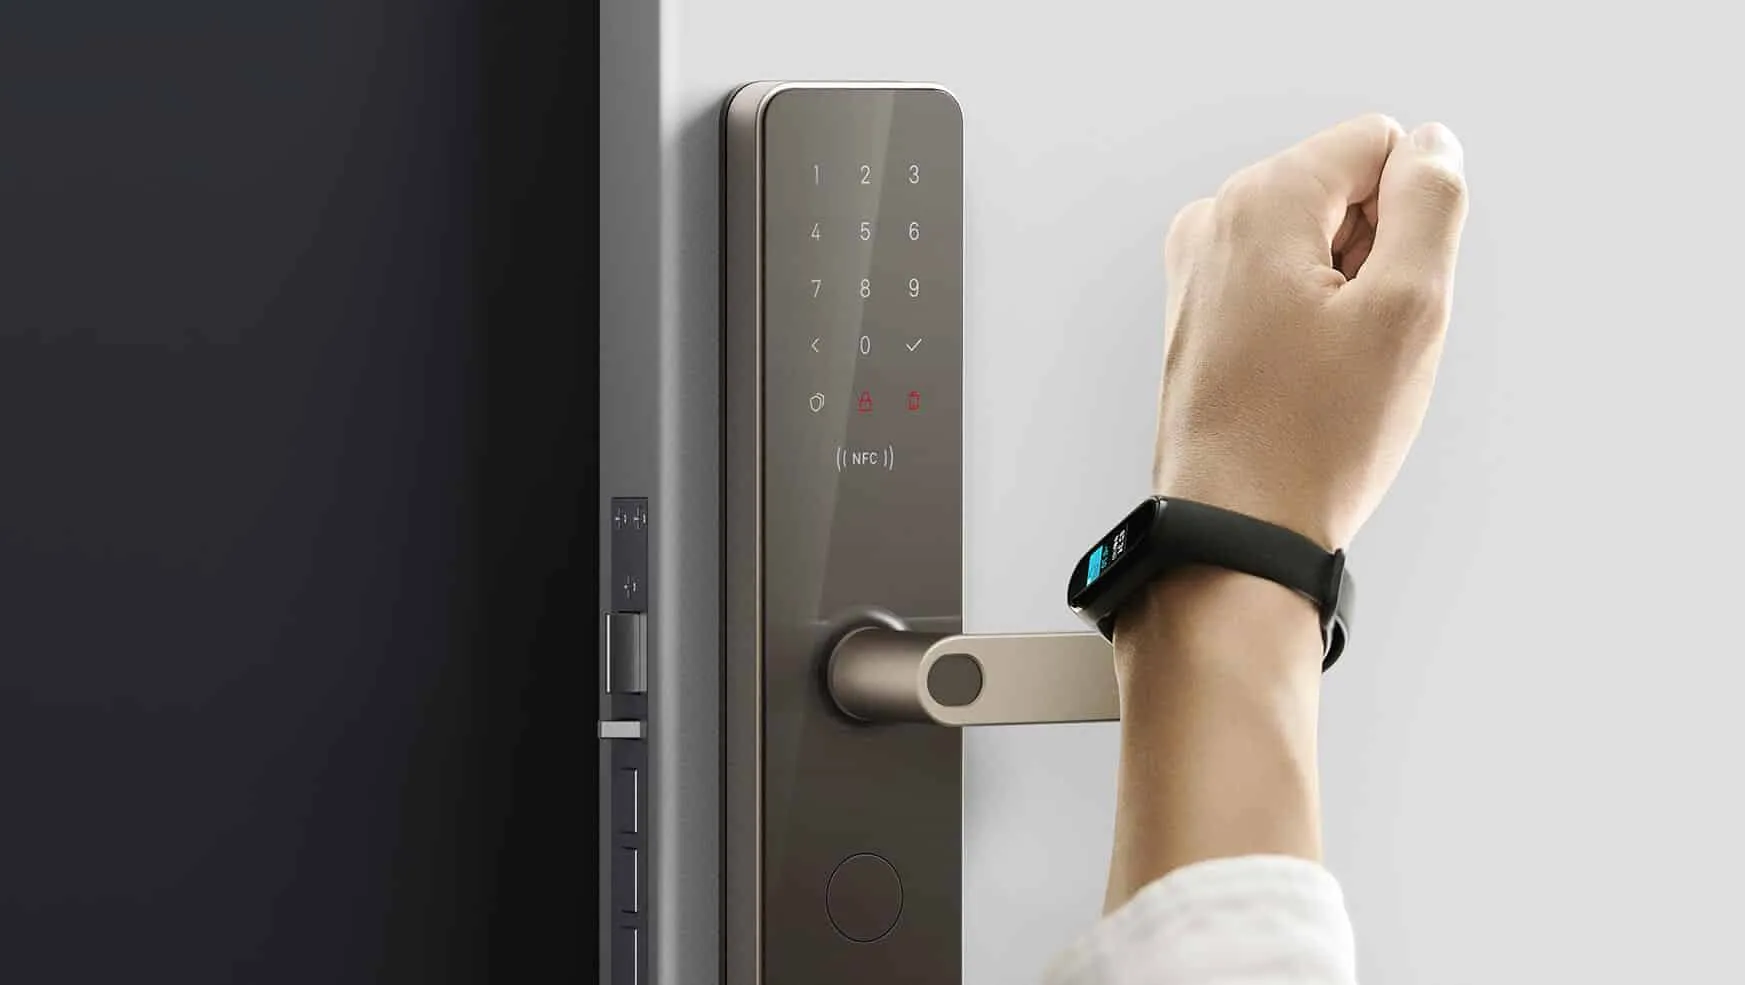 smart door locks with NFC and a fingerprint sensor that can replace a traditional padlock